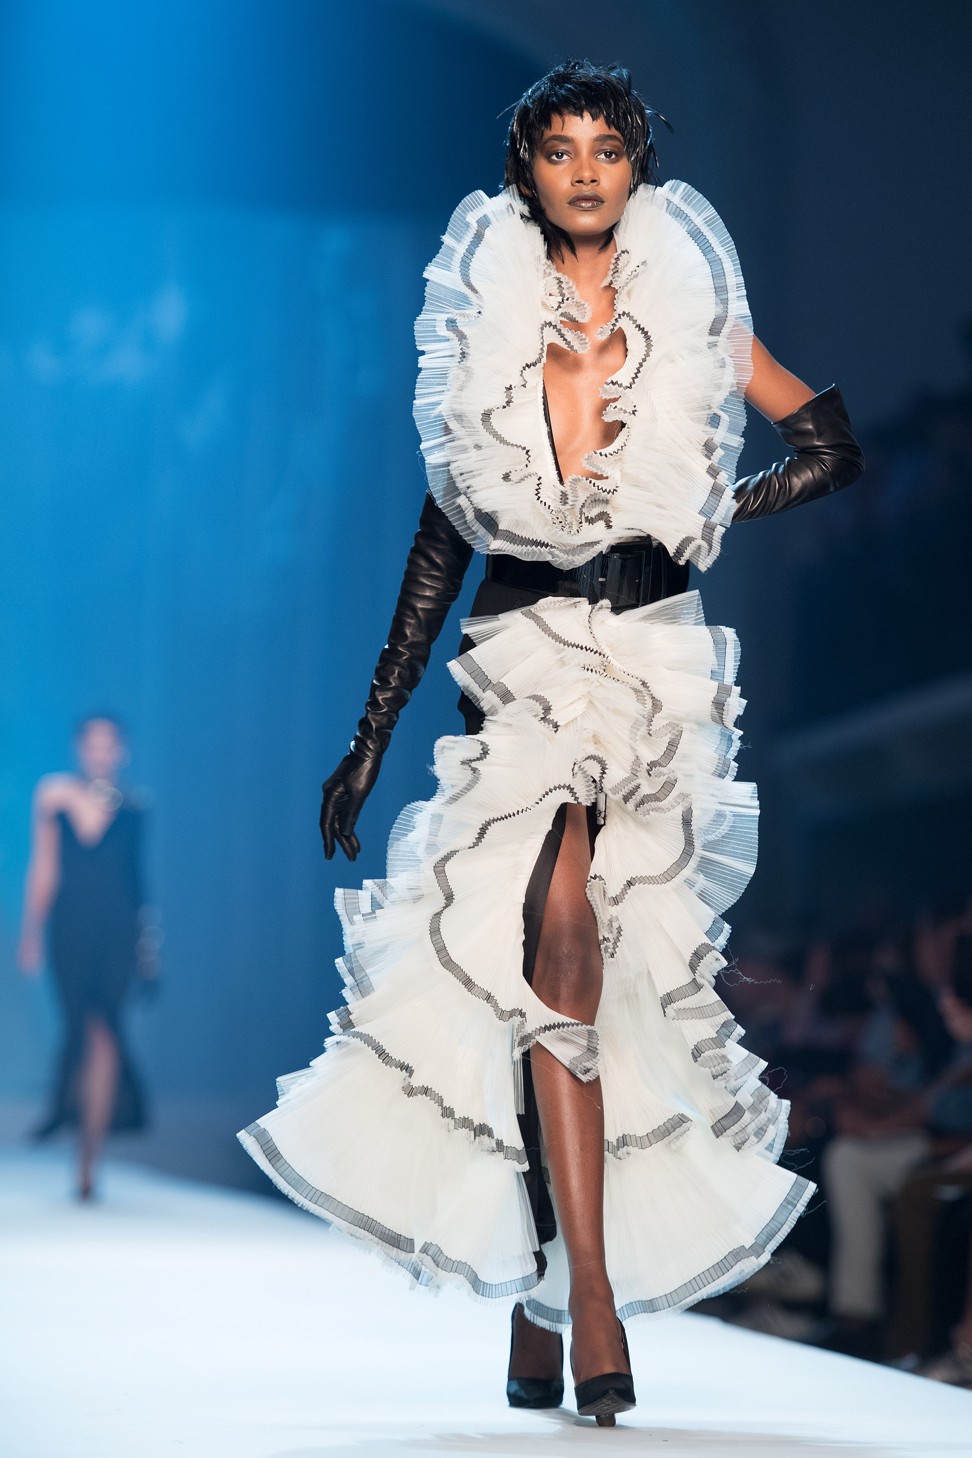 Gaultier’s avant-garde collection highlights freedom of the individual ...